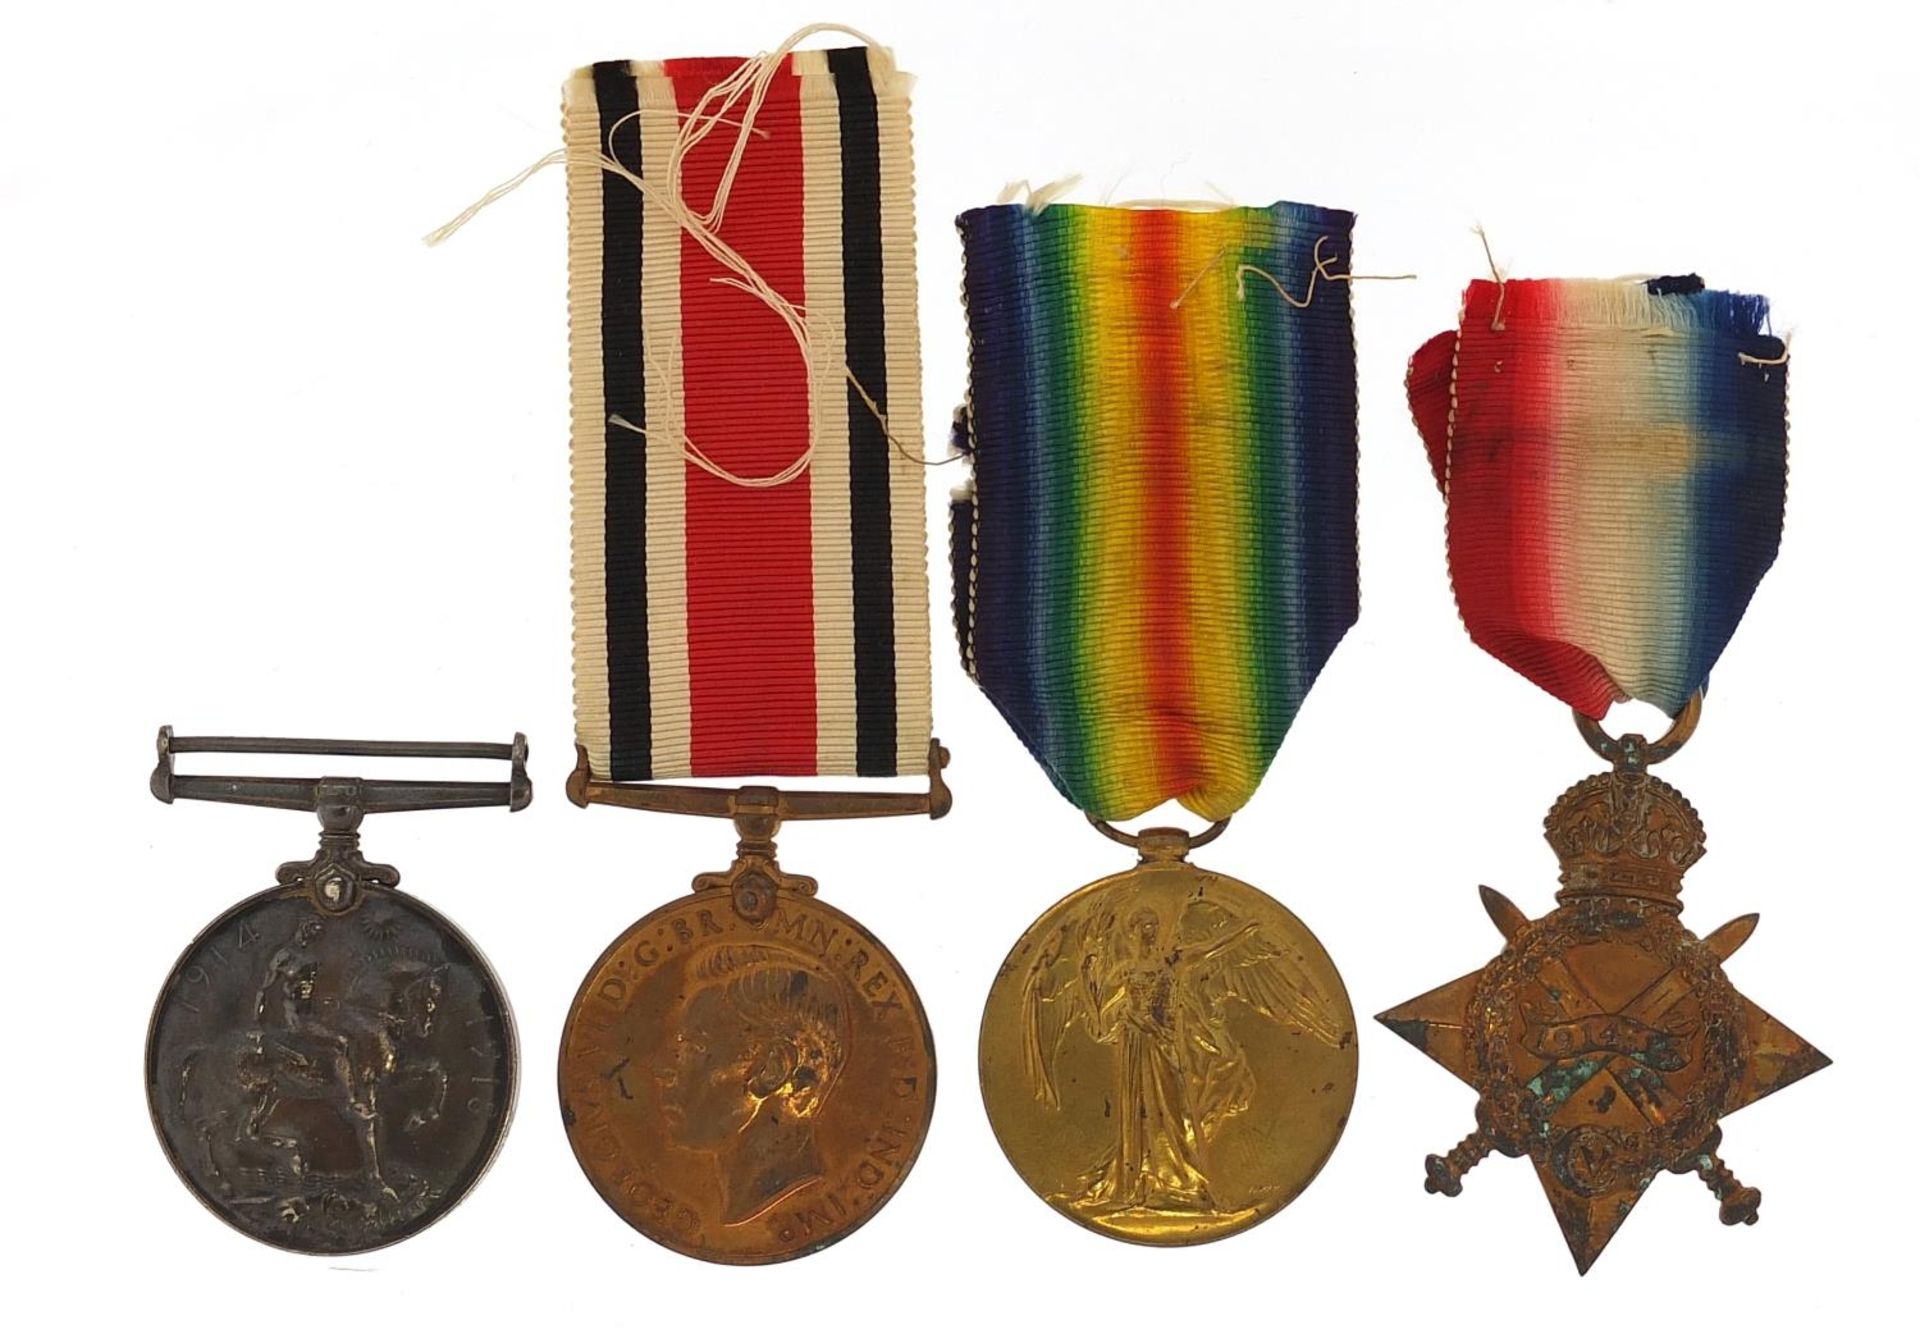 British military World War I four medal group awarded to 2466 CPL.W.COPLAND.HIGH.L.I. - Image 2 of 6